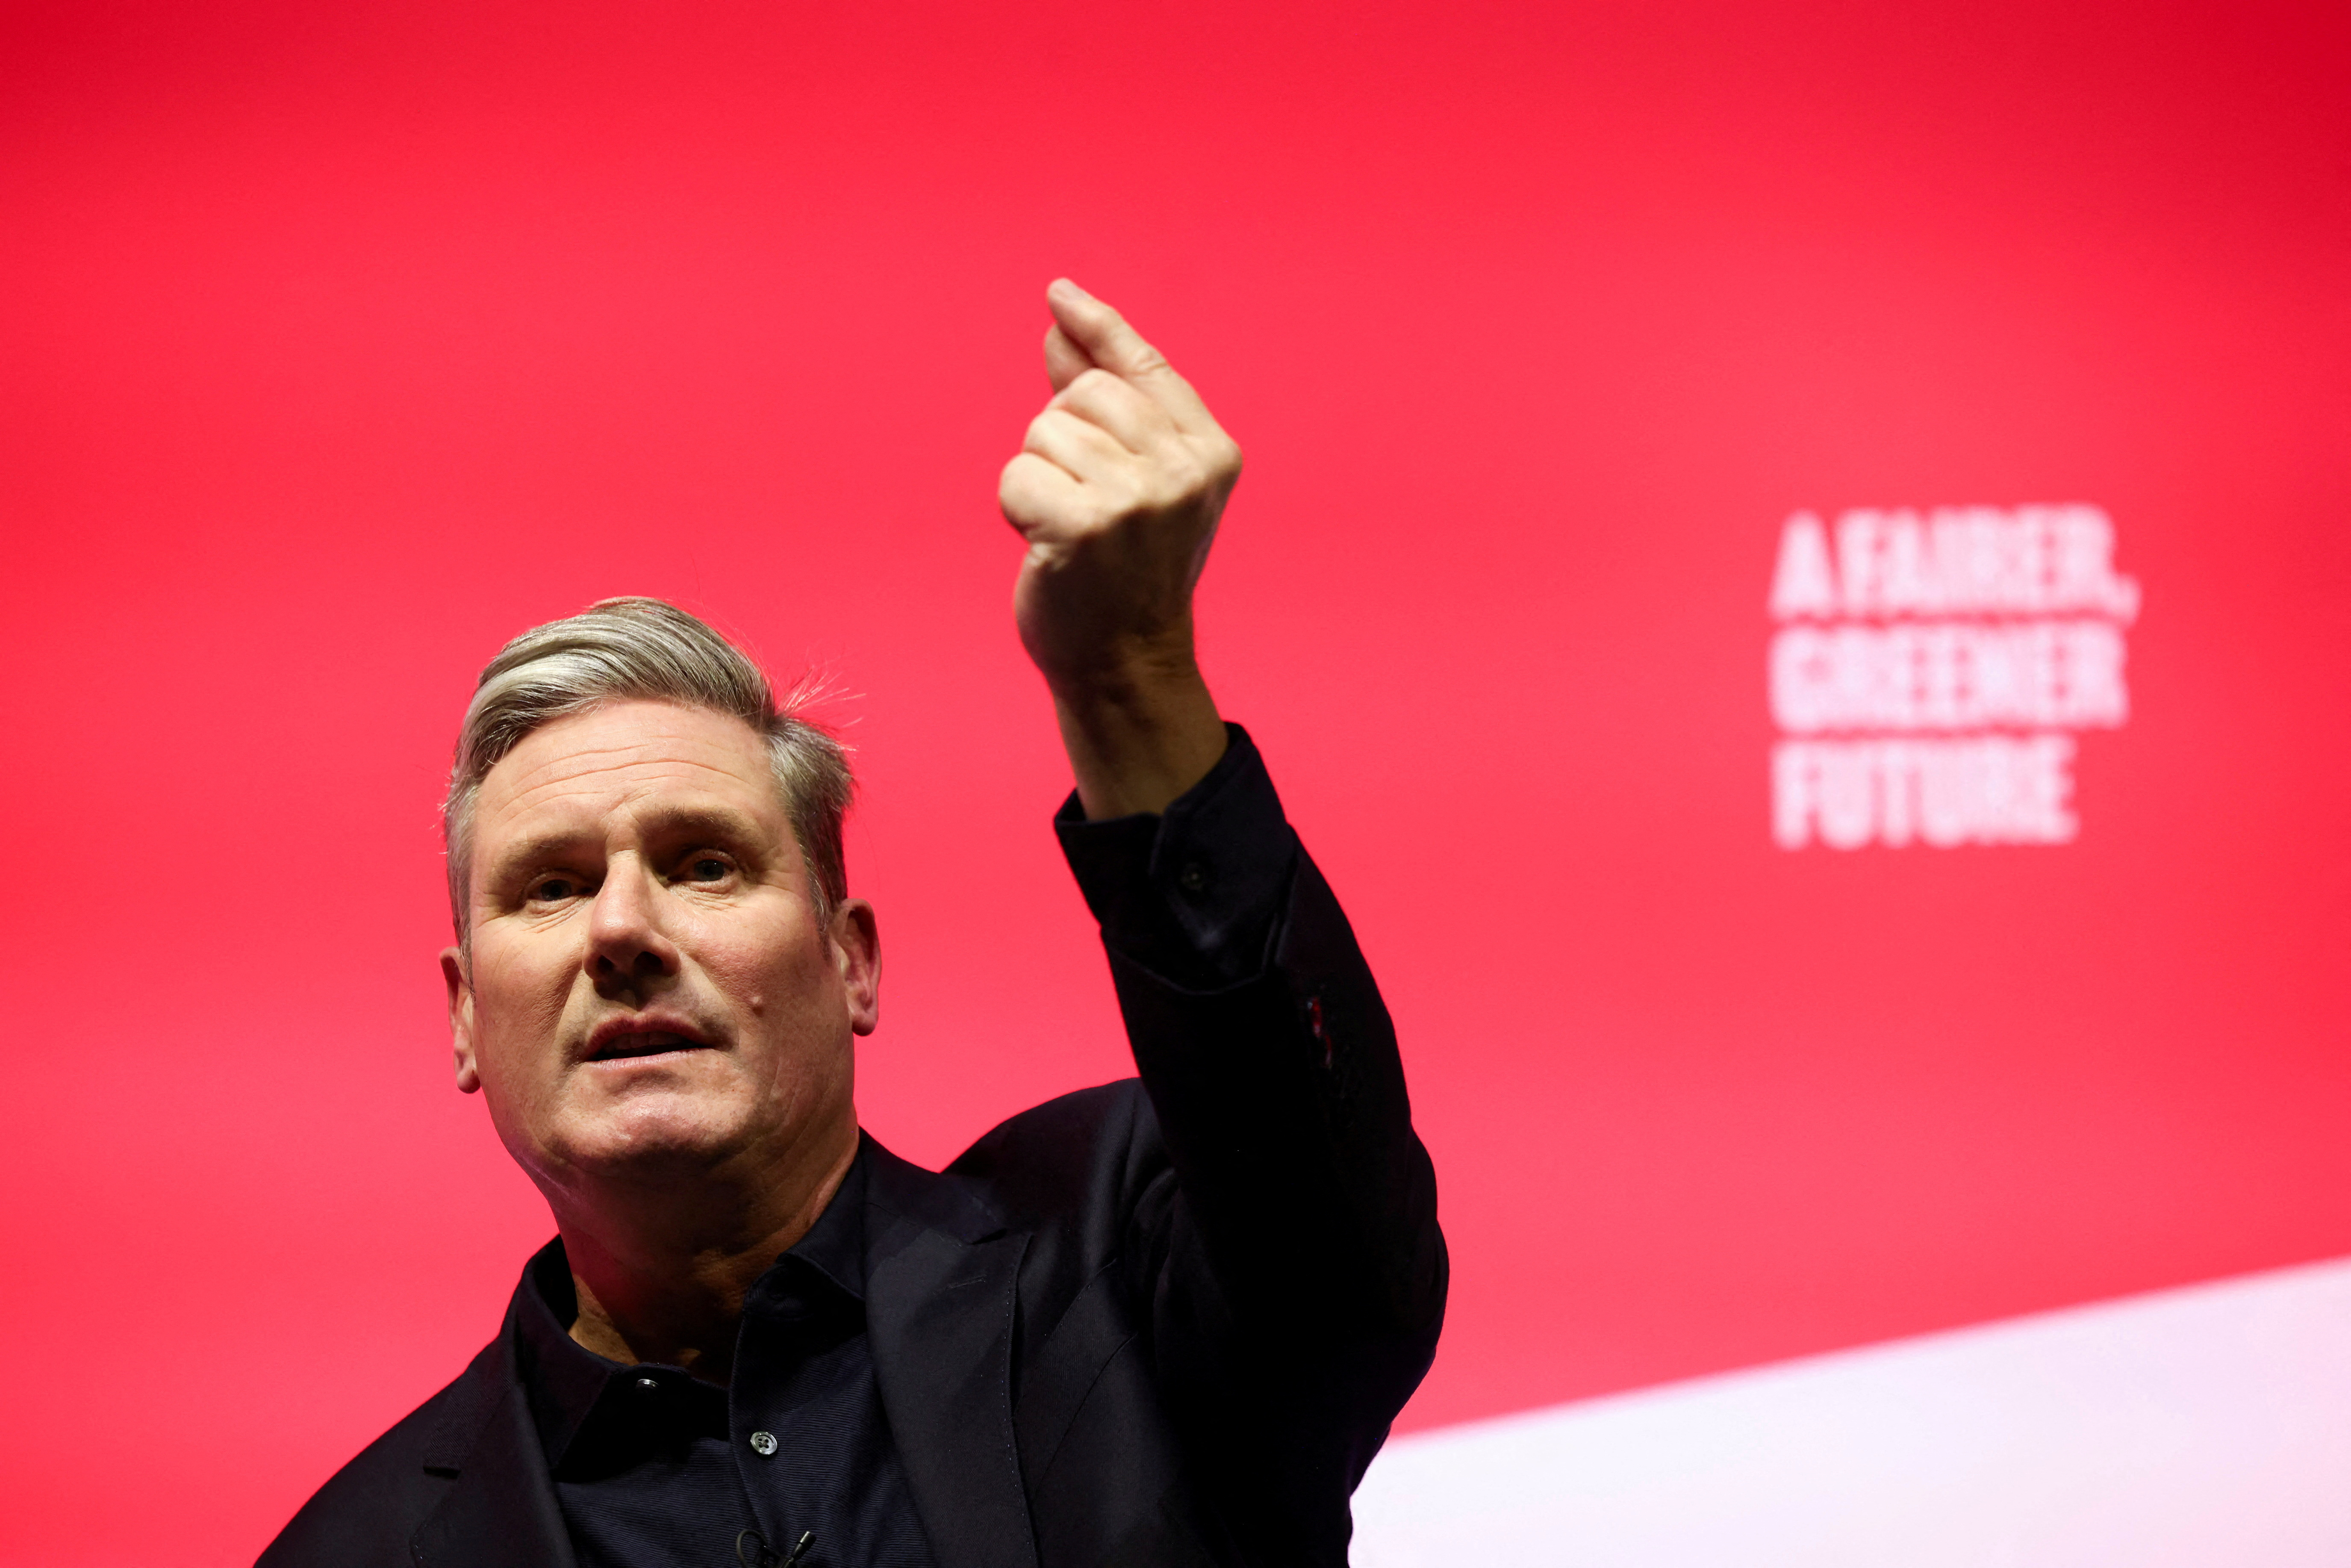 Annual Labour Party conference held in Liverpool